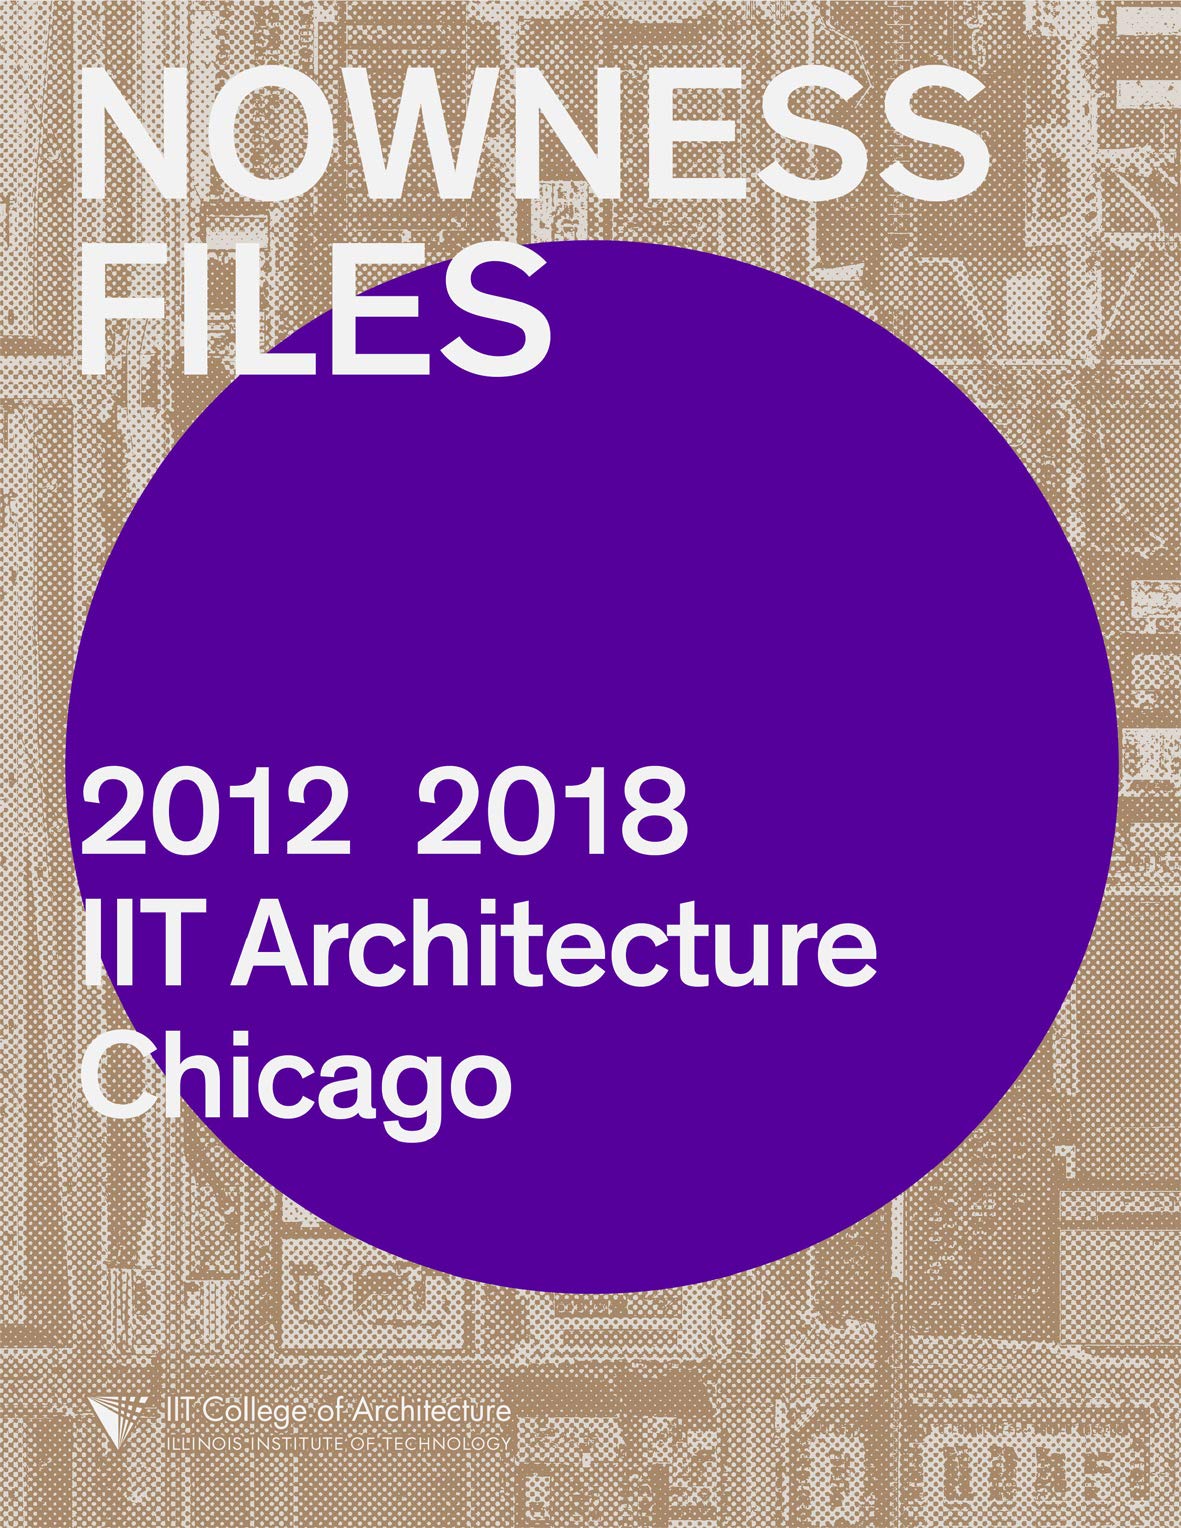 Nowness Files: 2012-2018: IIT Architecture Chicago | Wiel Arets